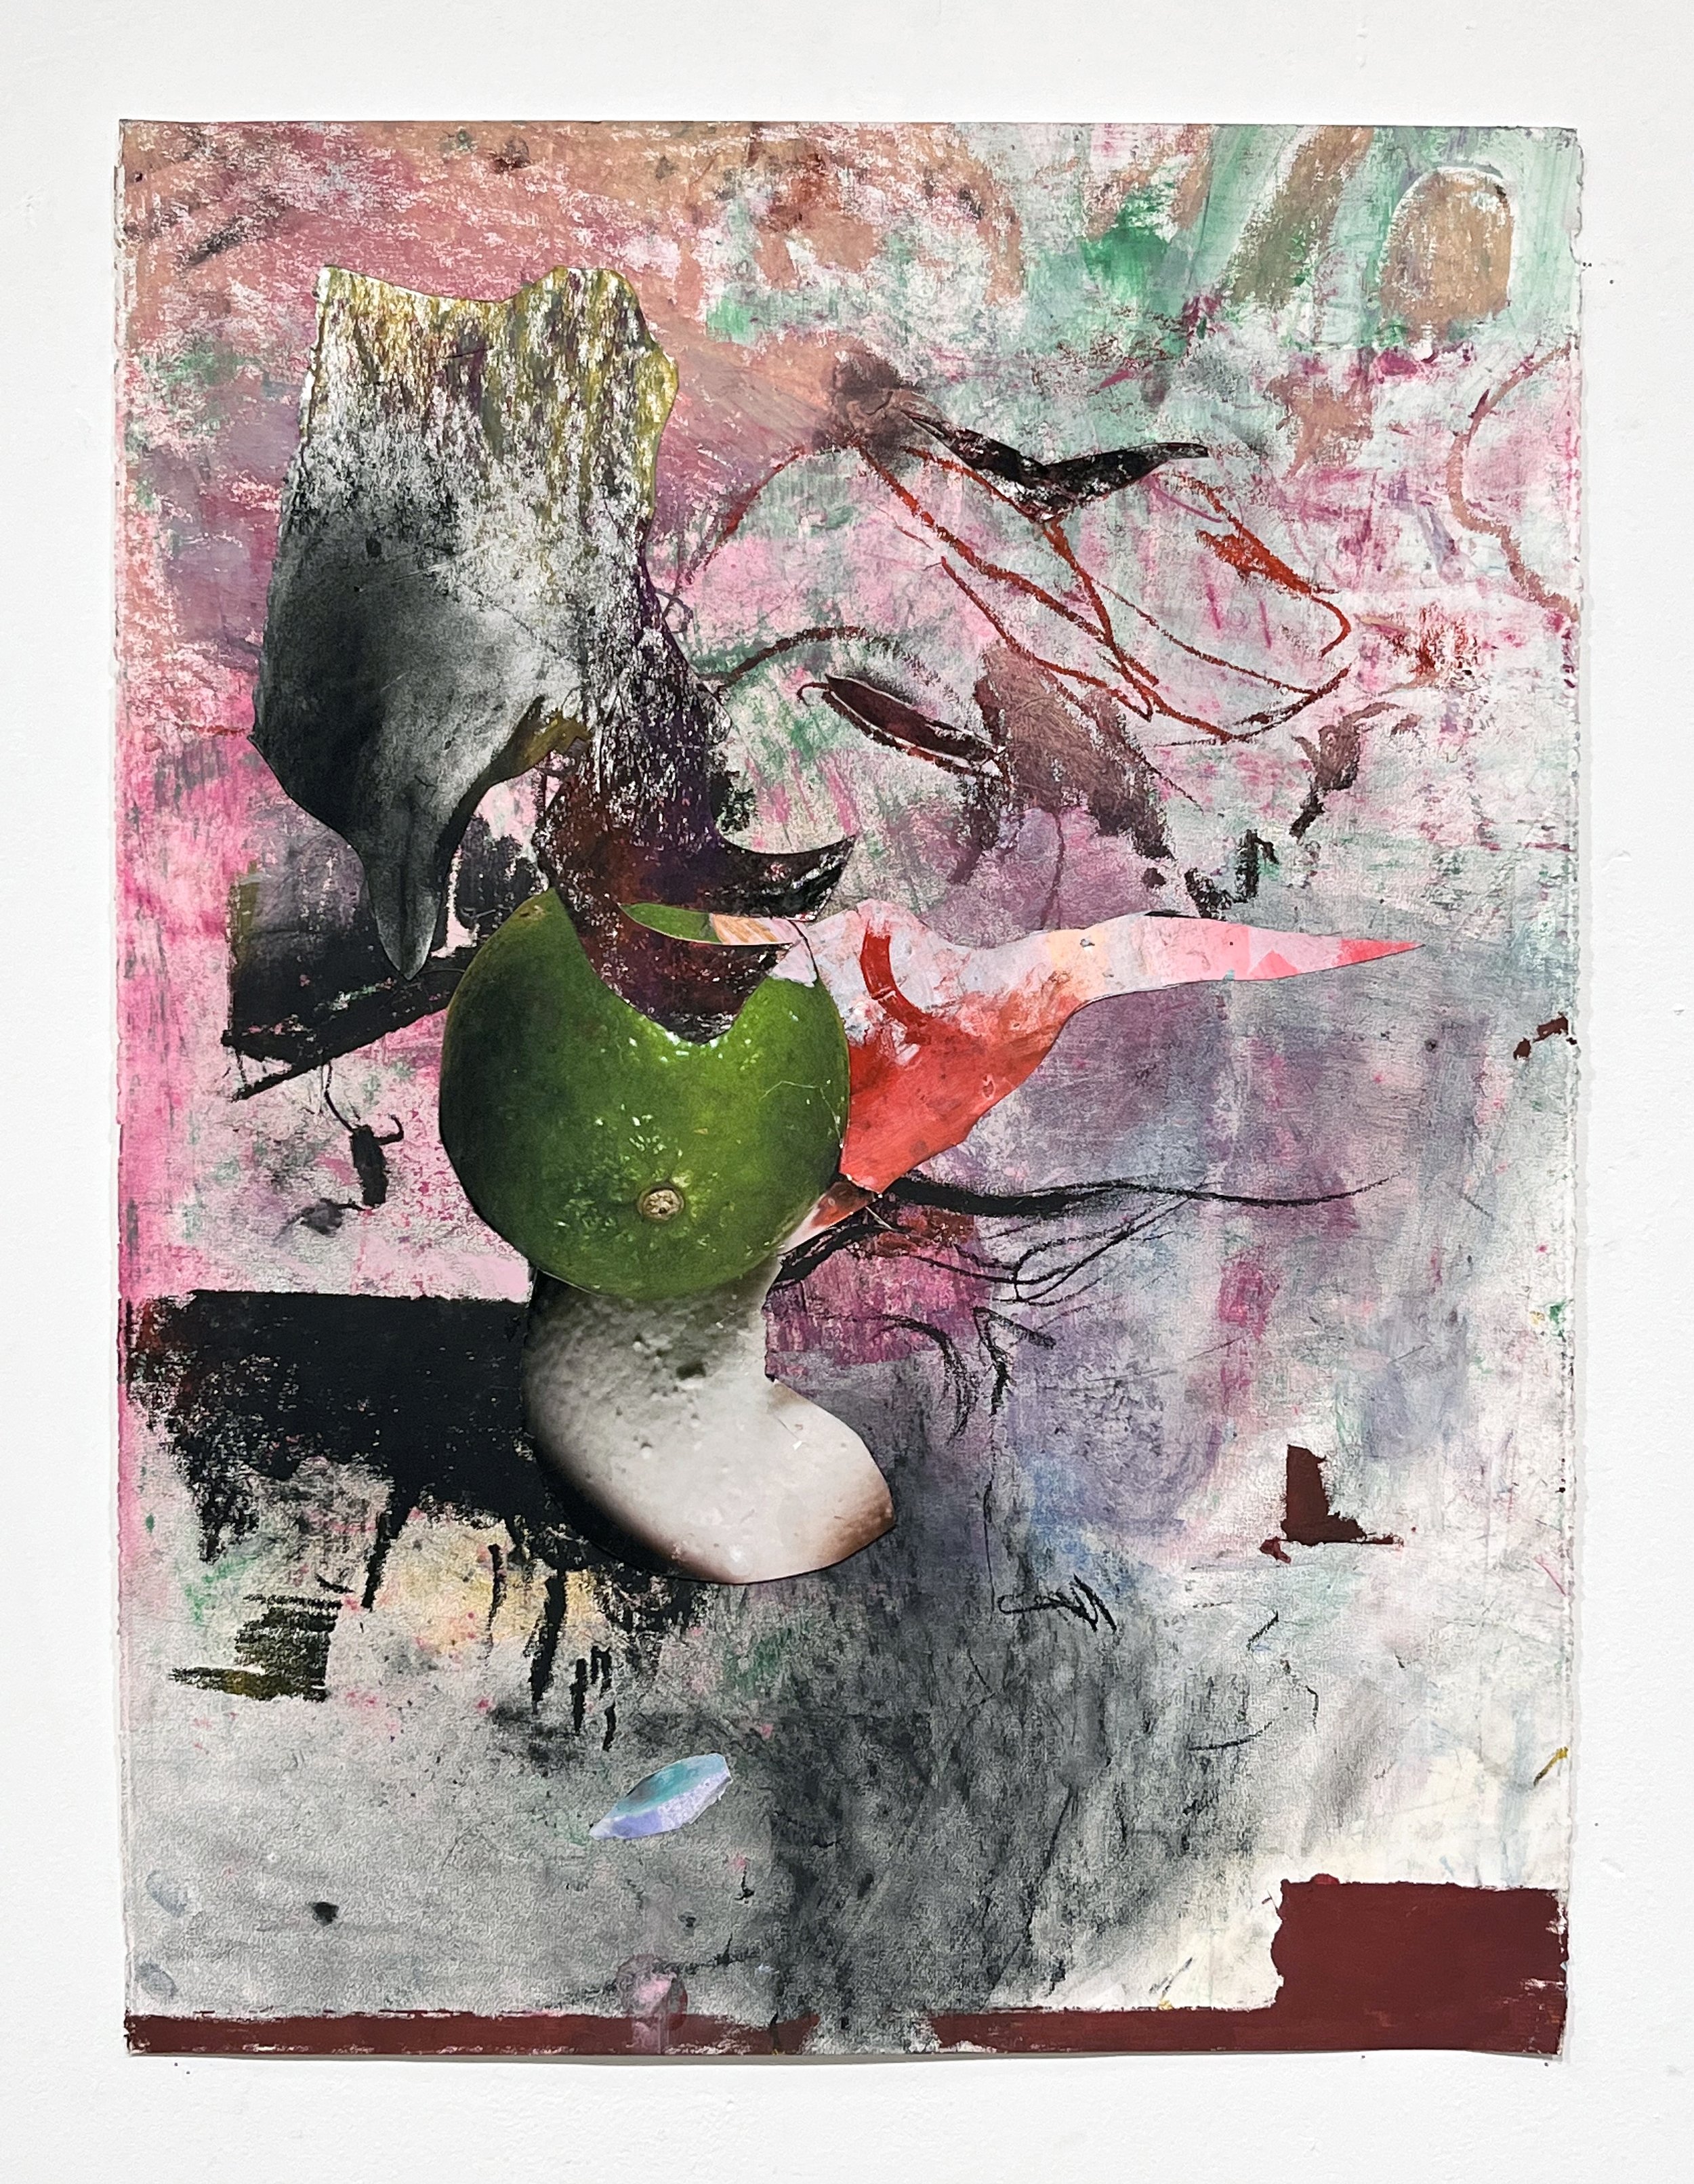  A smolder in the eye, 2022, mixed media on paper, 30 x 22 ½ inches 